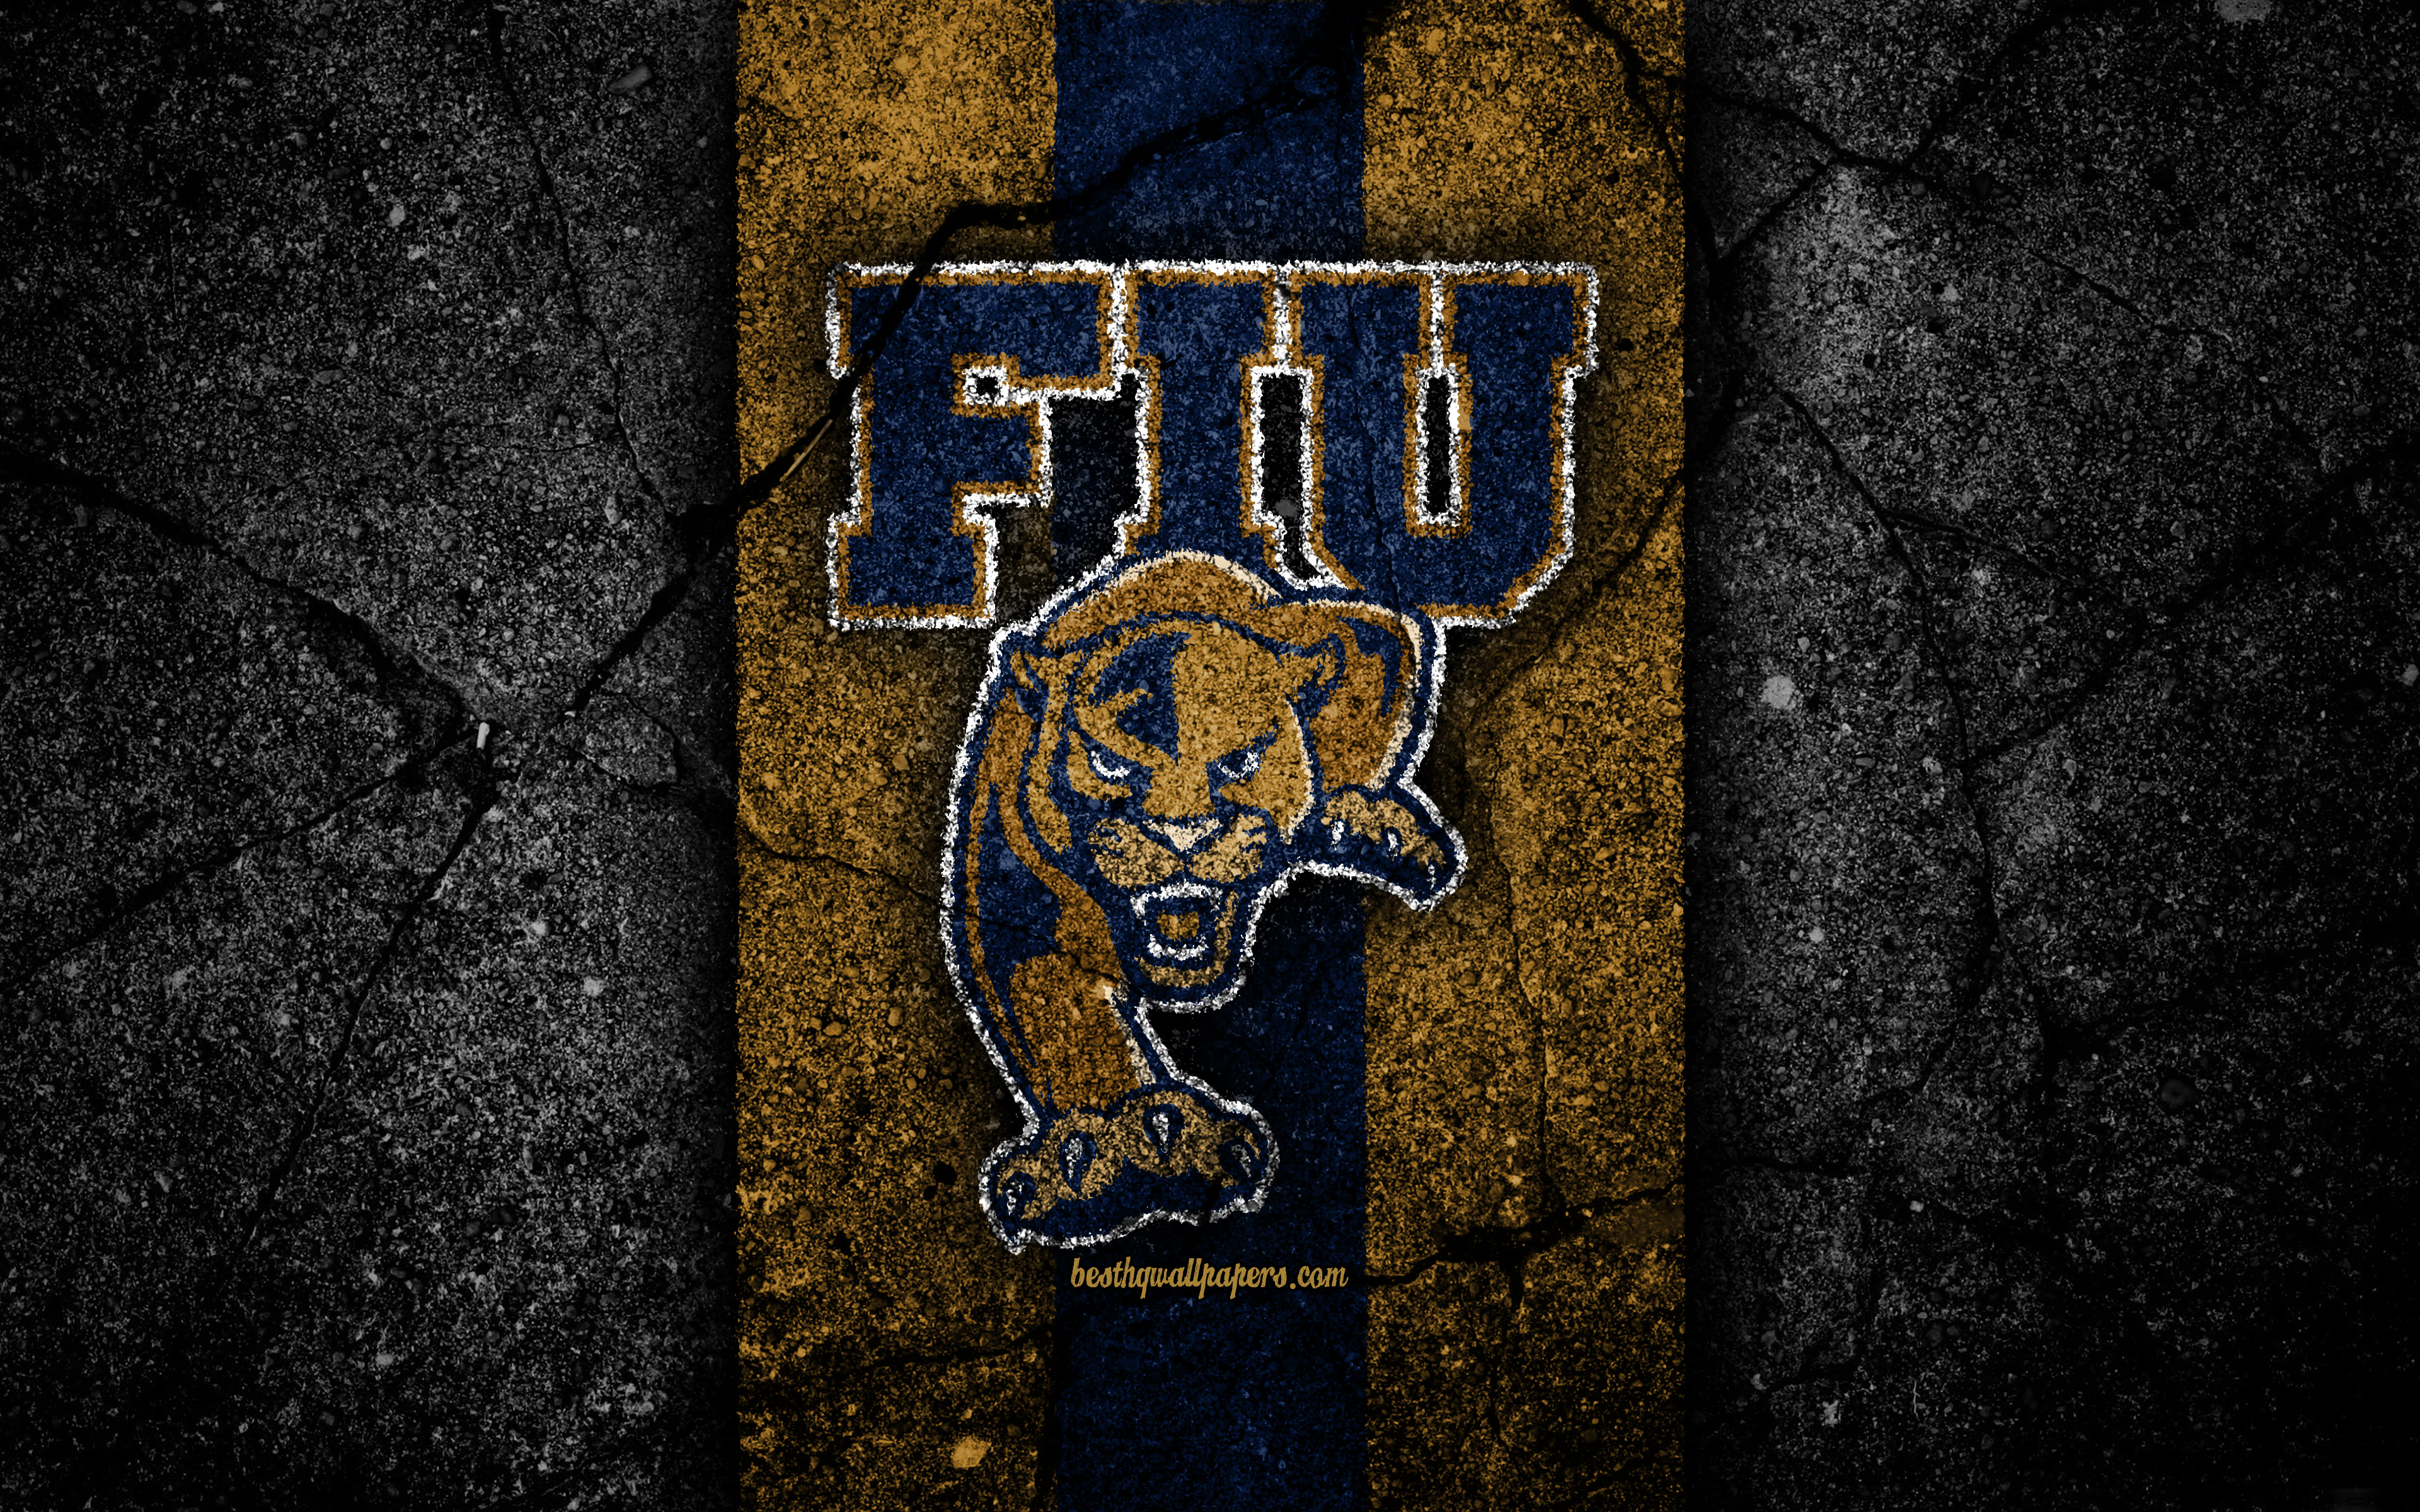 Download wallpaper FIU Panthers, 4k, american football team, NCAA, yellow black stone, USA, asphalt texture, american football, FIU Panthers logo for desktop with resolution 3840x2400. High Quality HD picture wallpaper